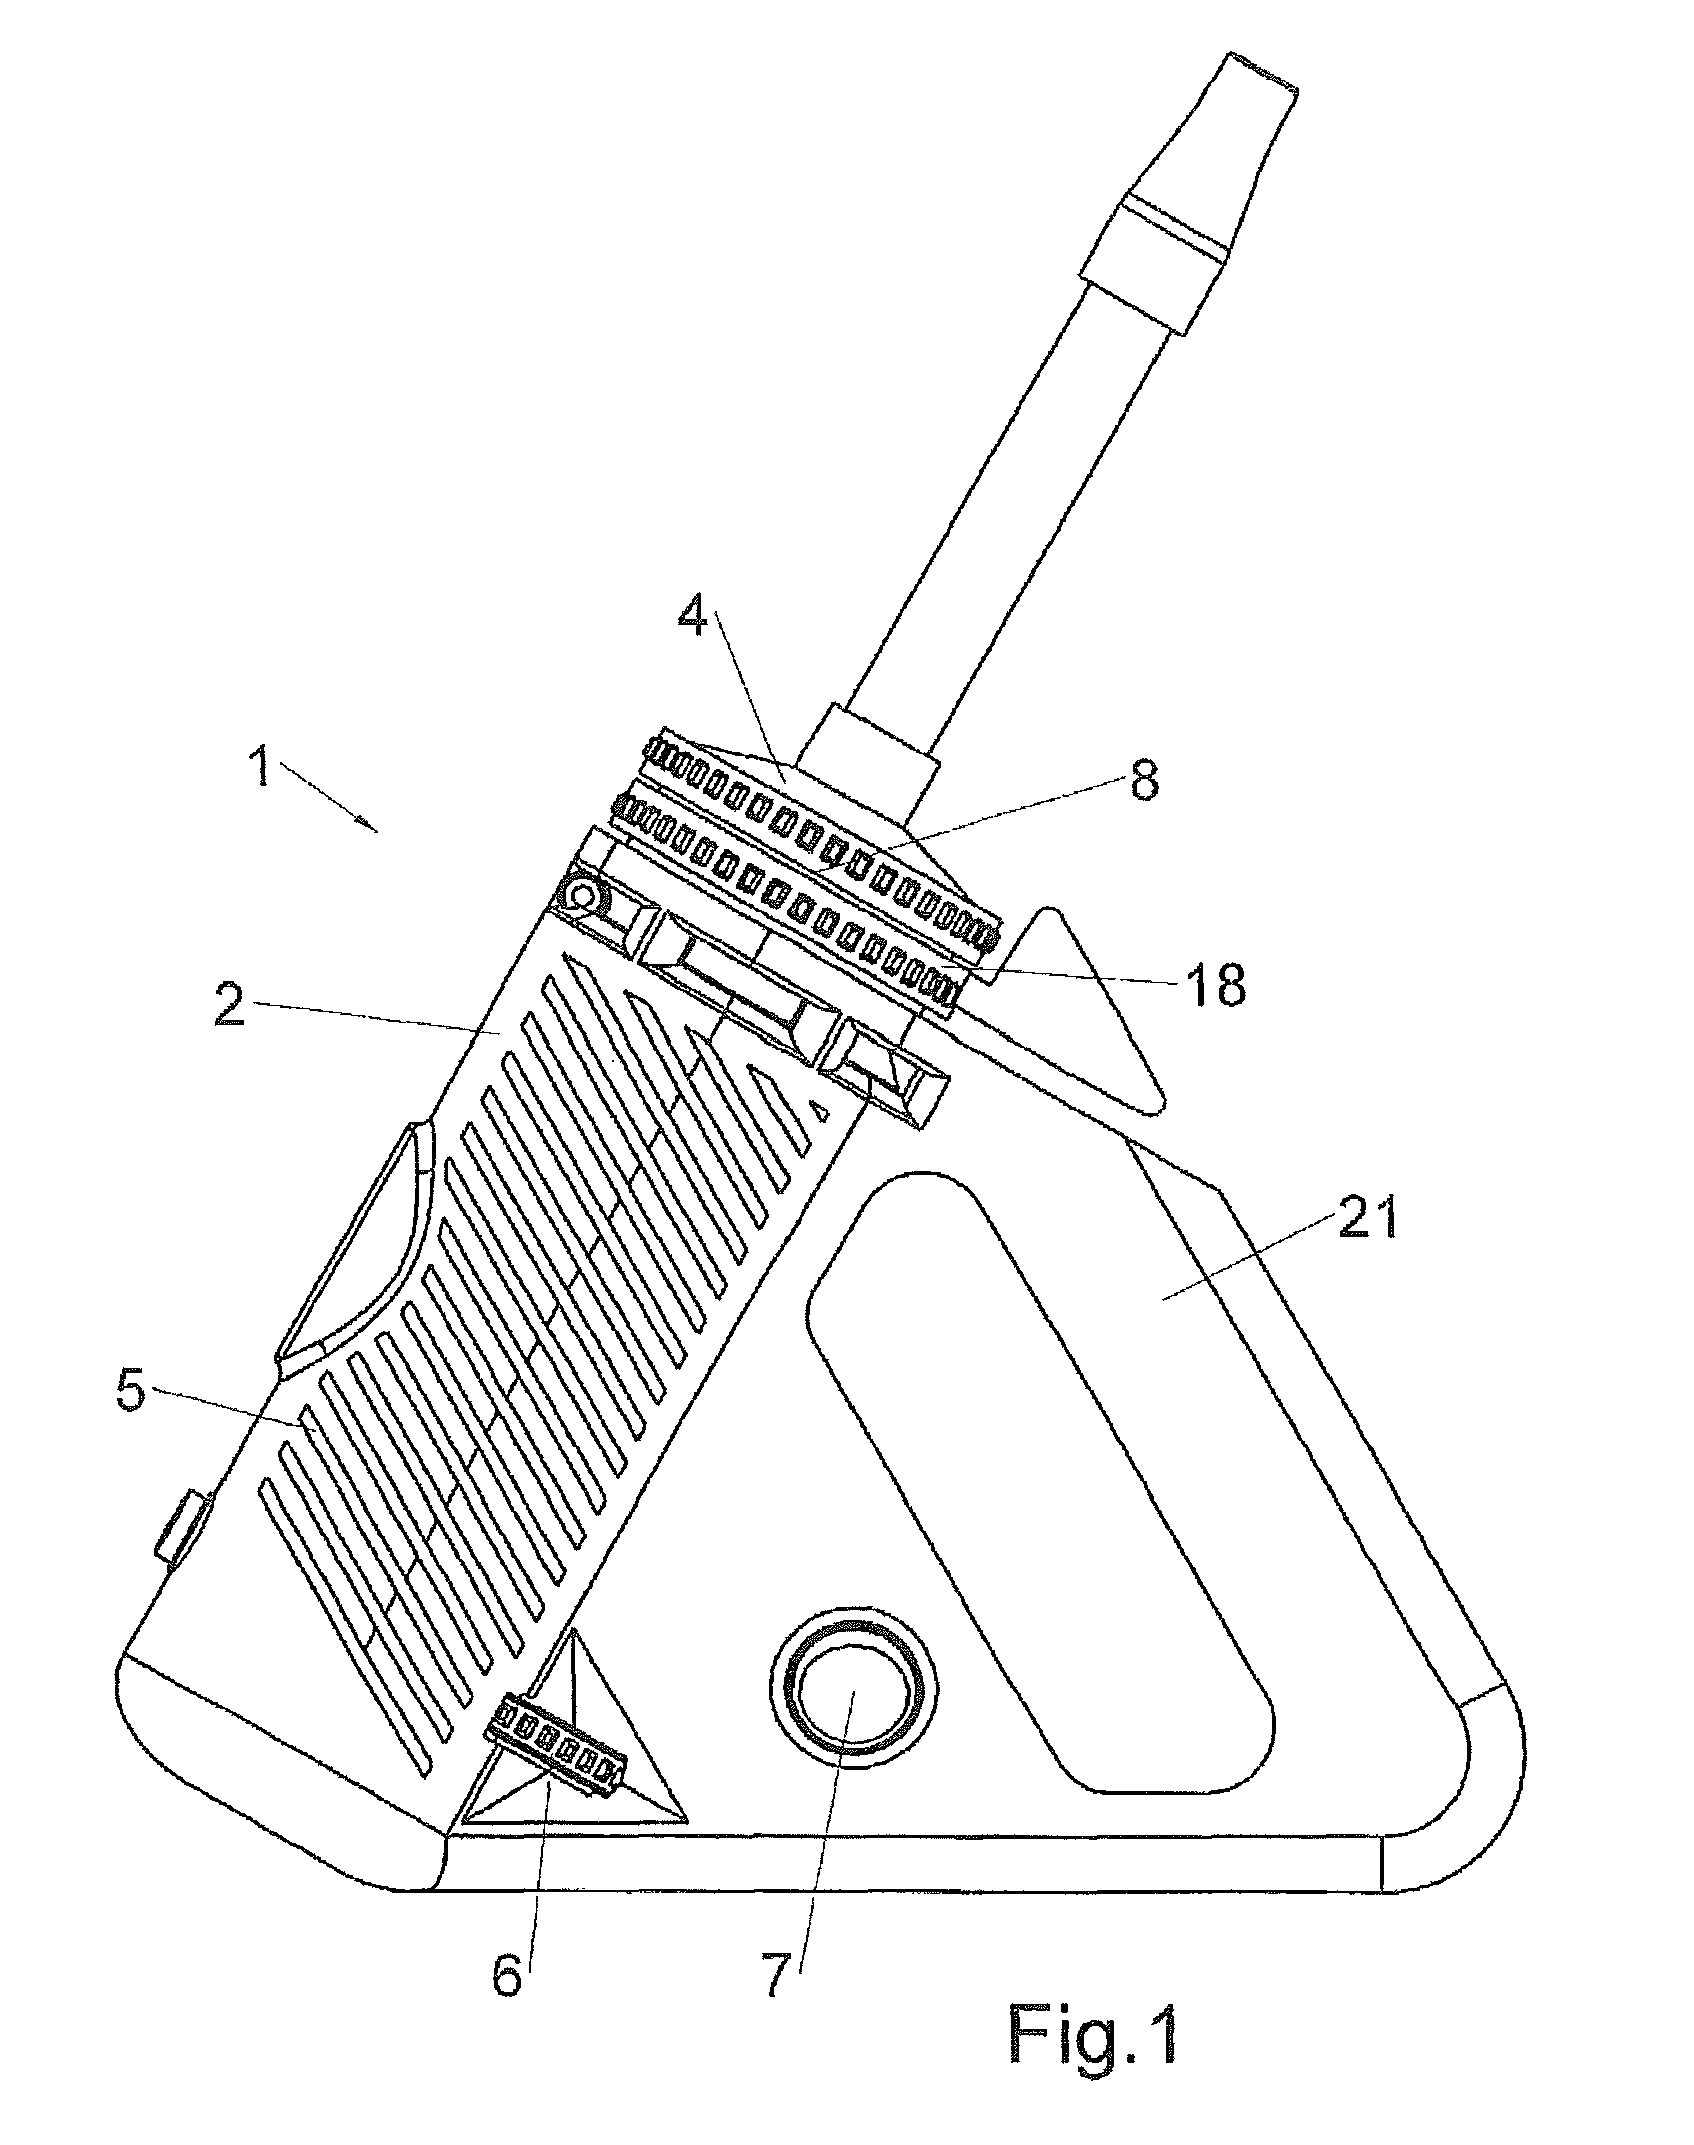 Vaporizer with combined air and radiation heating